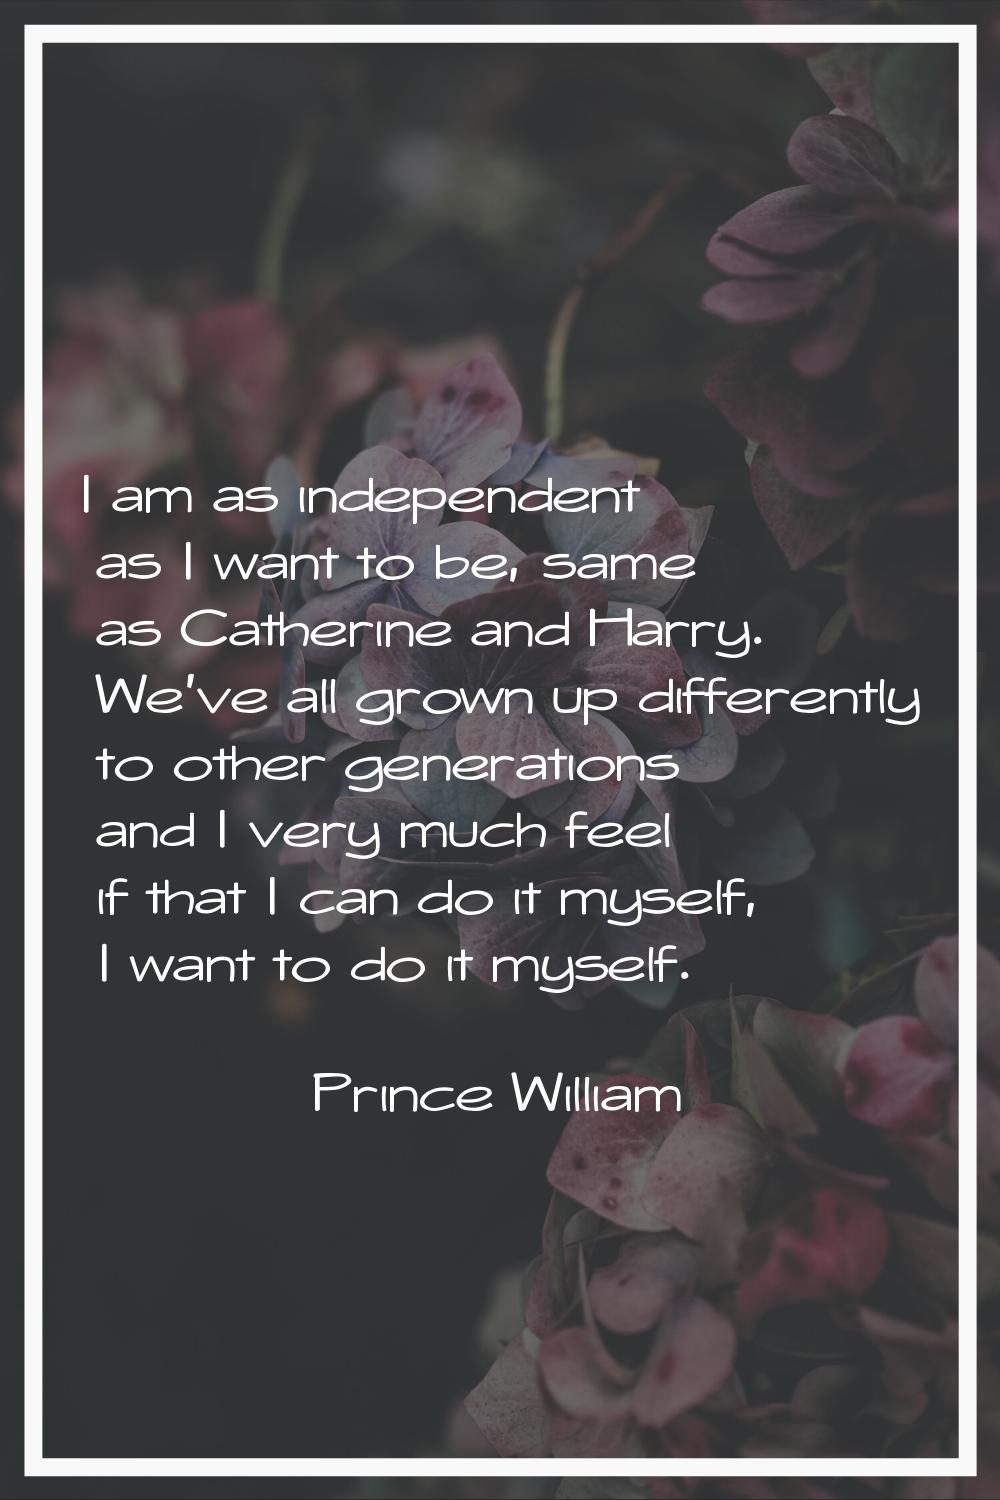 I am as independent as I want to be, same as Catherine and Harry. We've all grown up differently to